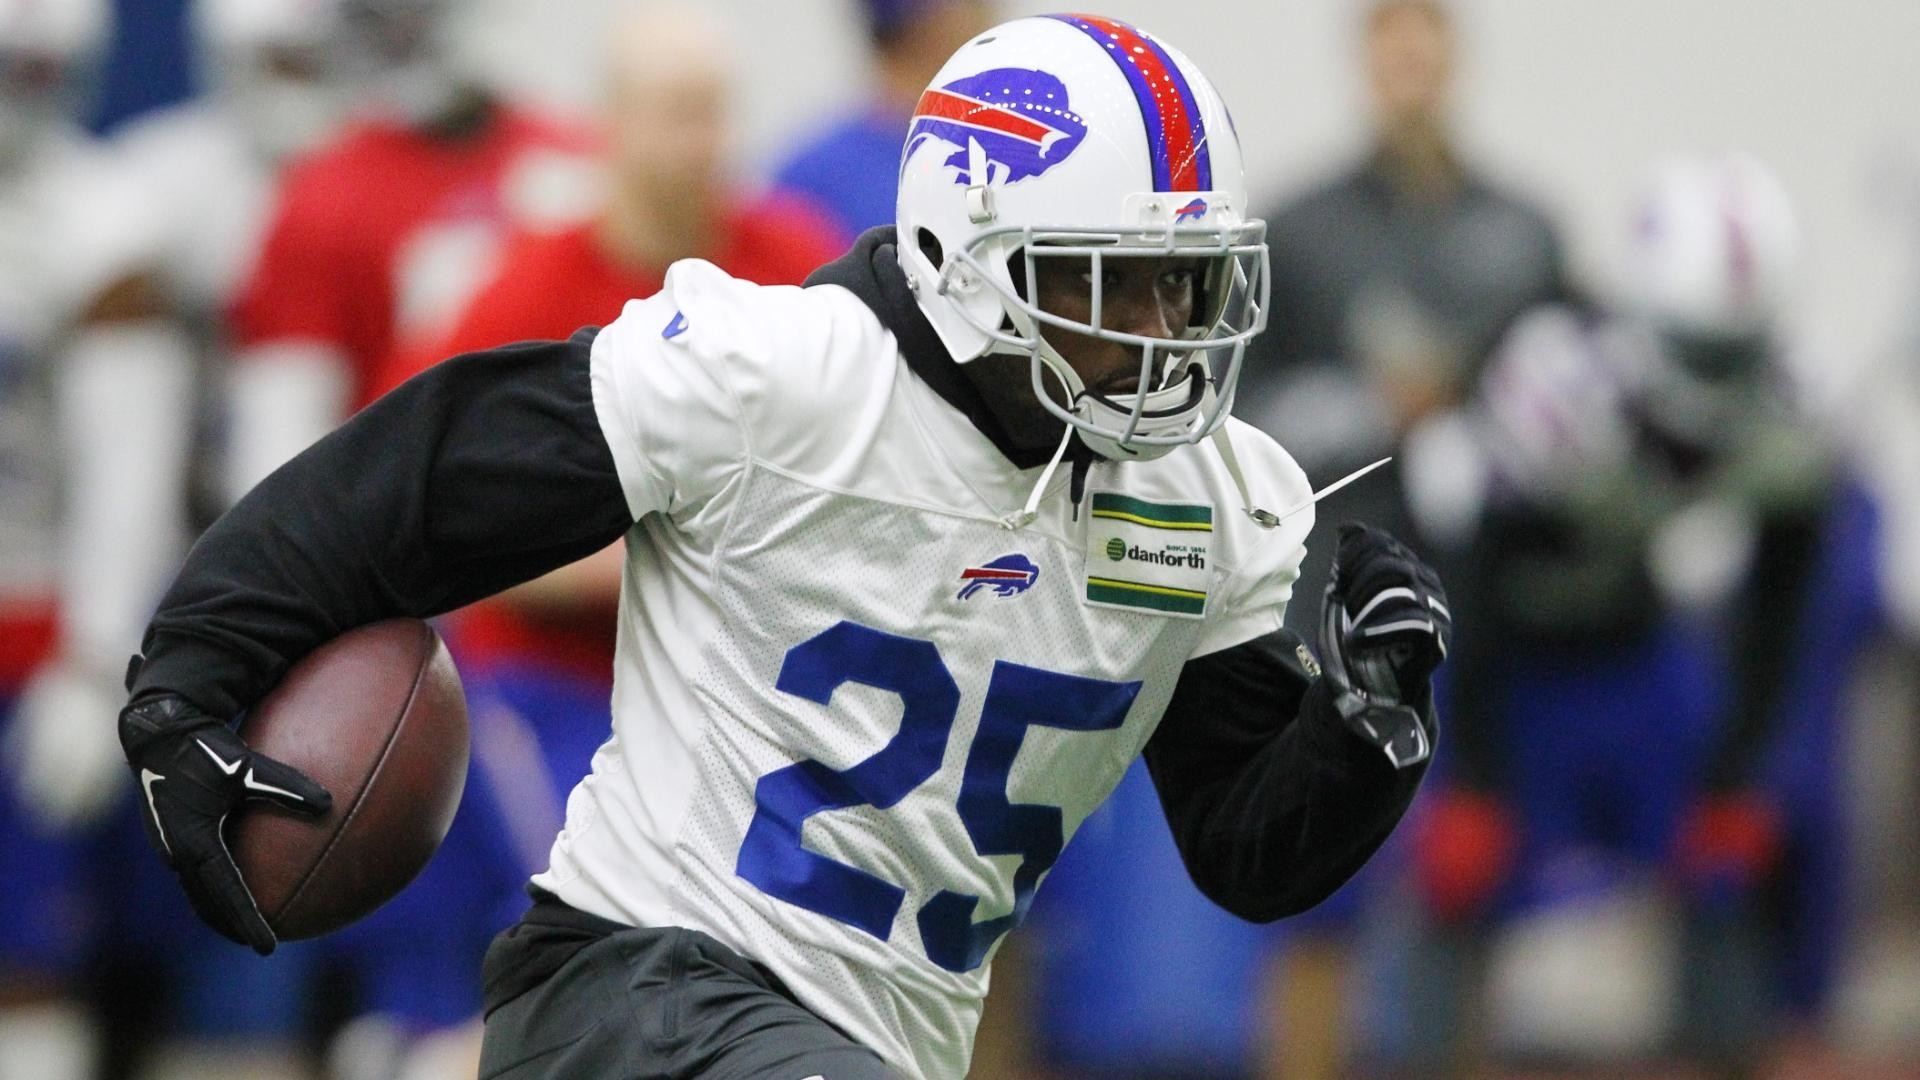 LeSean McCoy Hamstring pull typically a 3 to 4 week injury